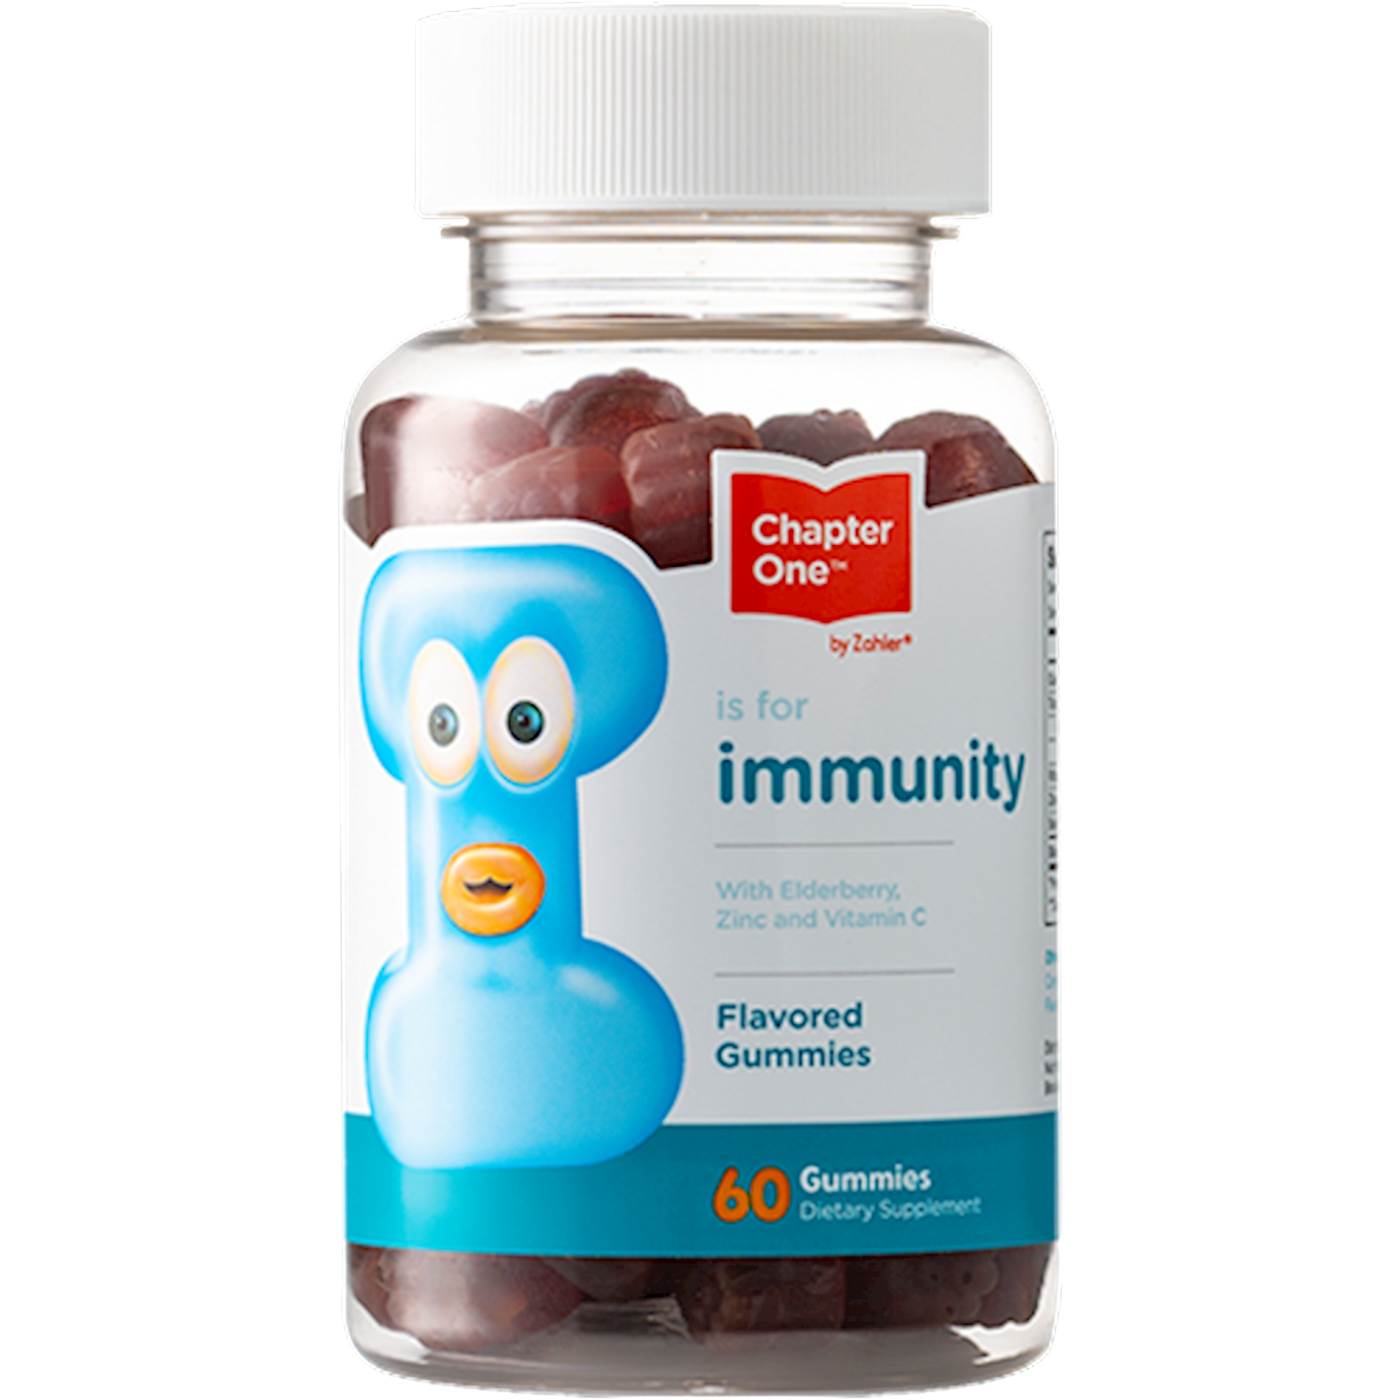 I is for Immunity 60 gummies Curated Wellness